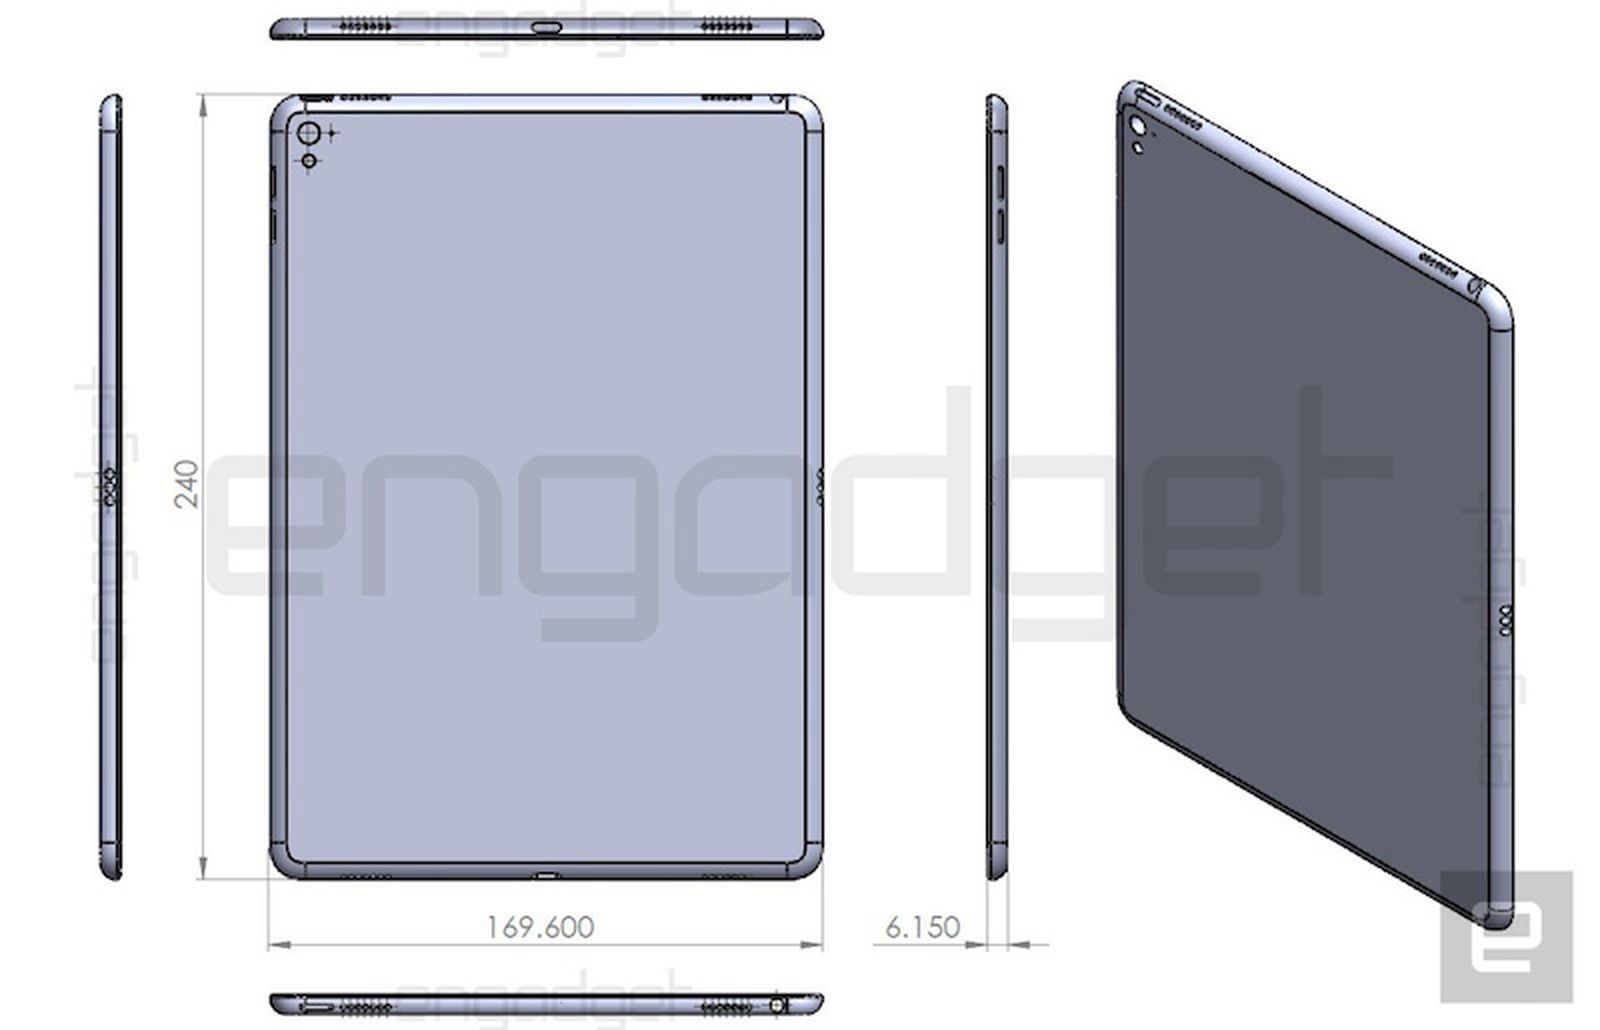 Apple's 'iPad Air 3' to Be Branded as an iPad Pro With Smart